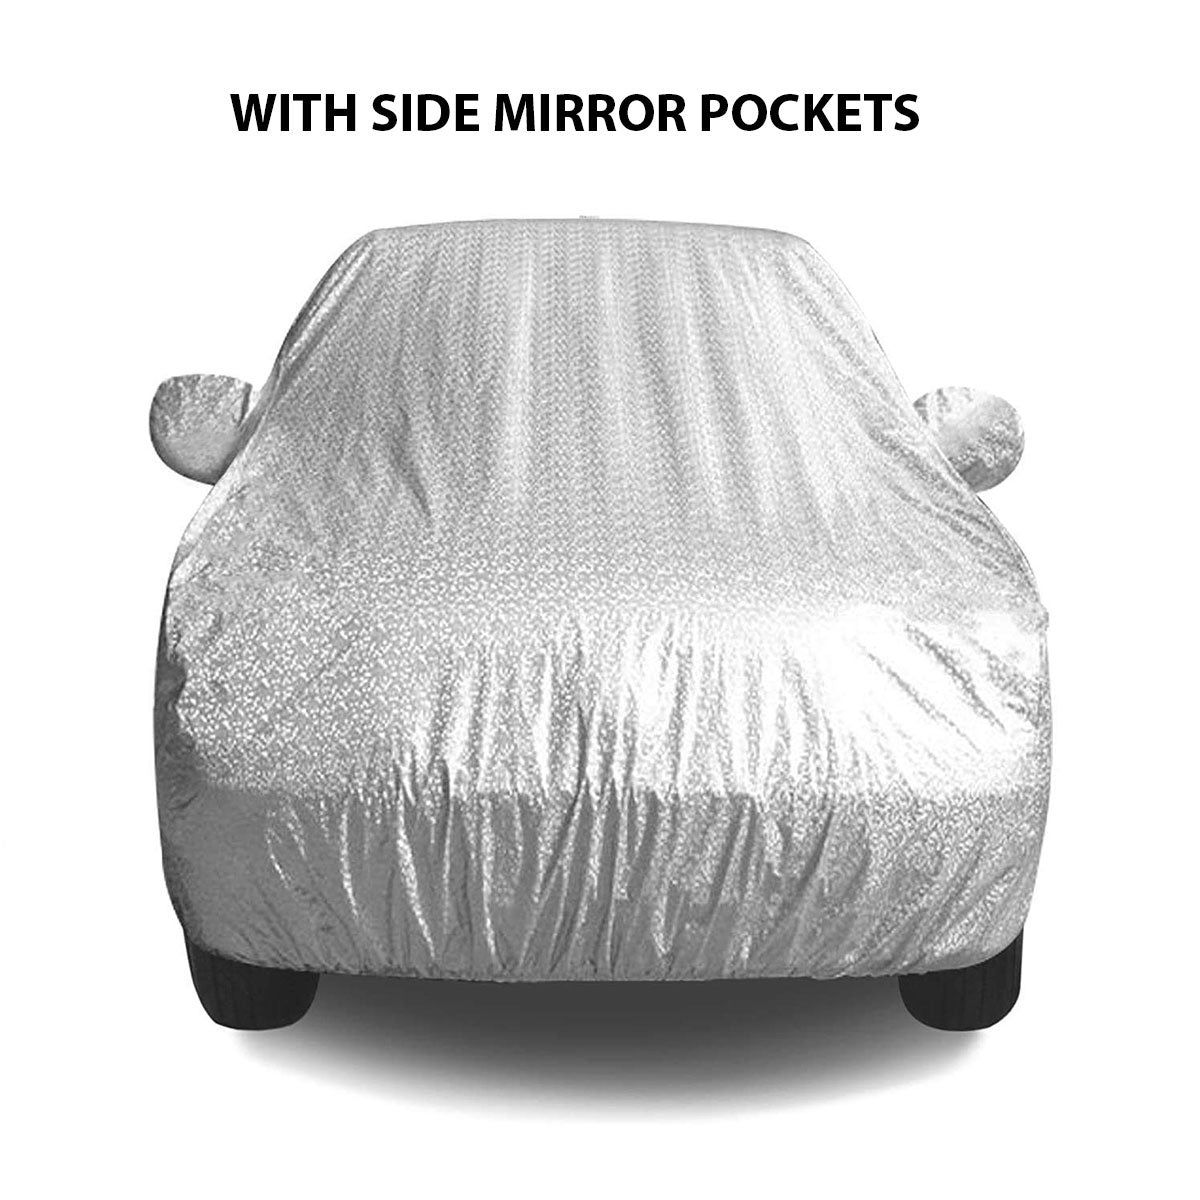 Oshotto Spyro Silver Anti Reflective, dustproof and Water Proof Car Body Cover with Mirror Pockets For Mahindra Thar